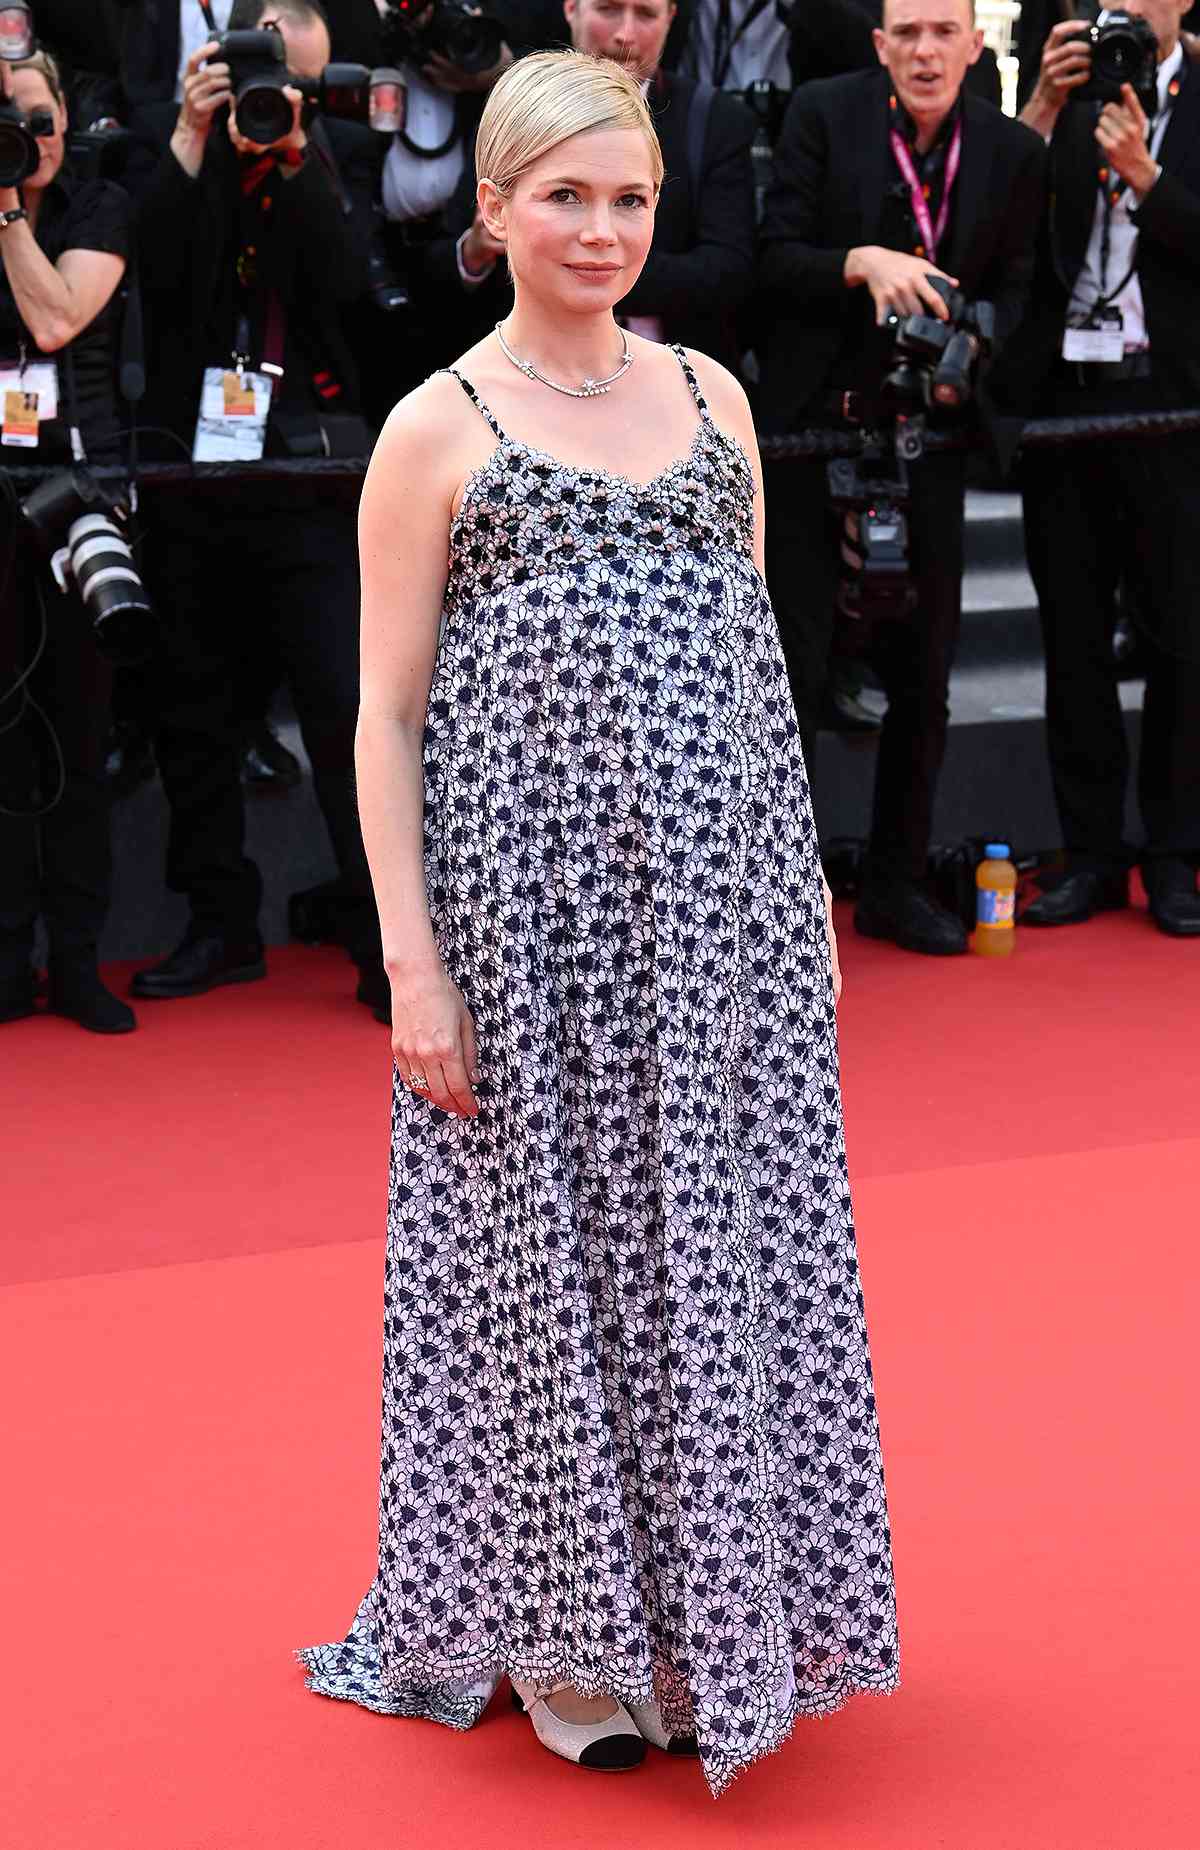 75th Cannes Film Festival, France – 27 May 2022